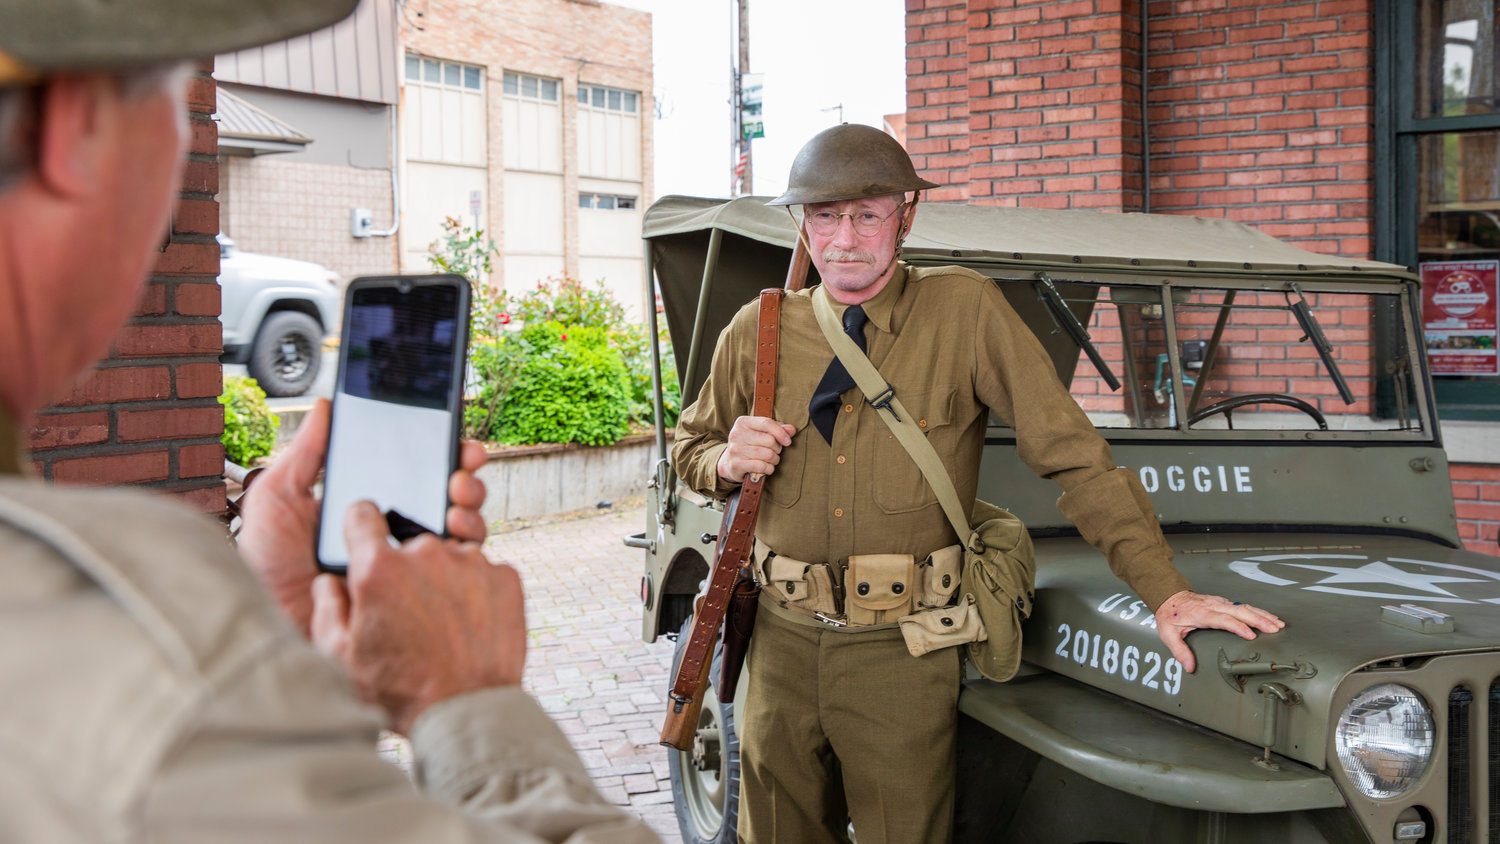 Scott Harriage takes a photo of Lawrence Sandlin sporting early World War II garb at the Lewis County Historical Museum in Chehalis.